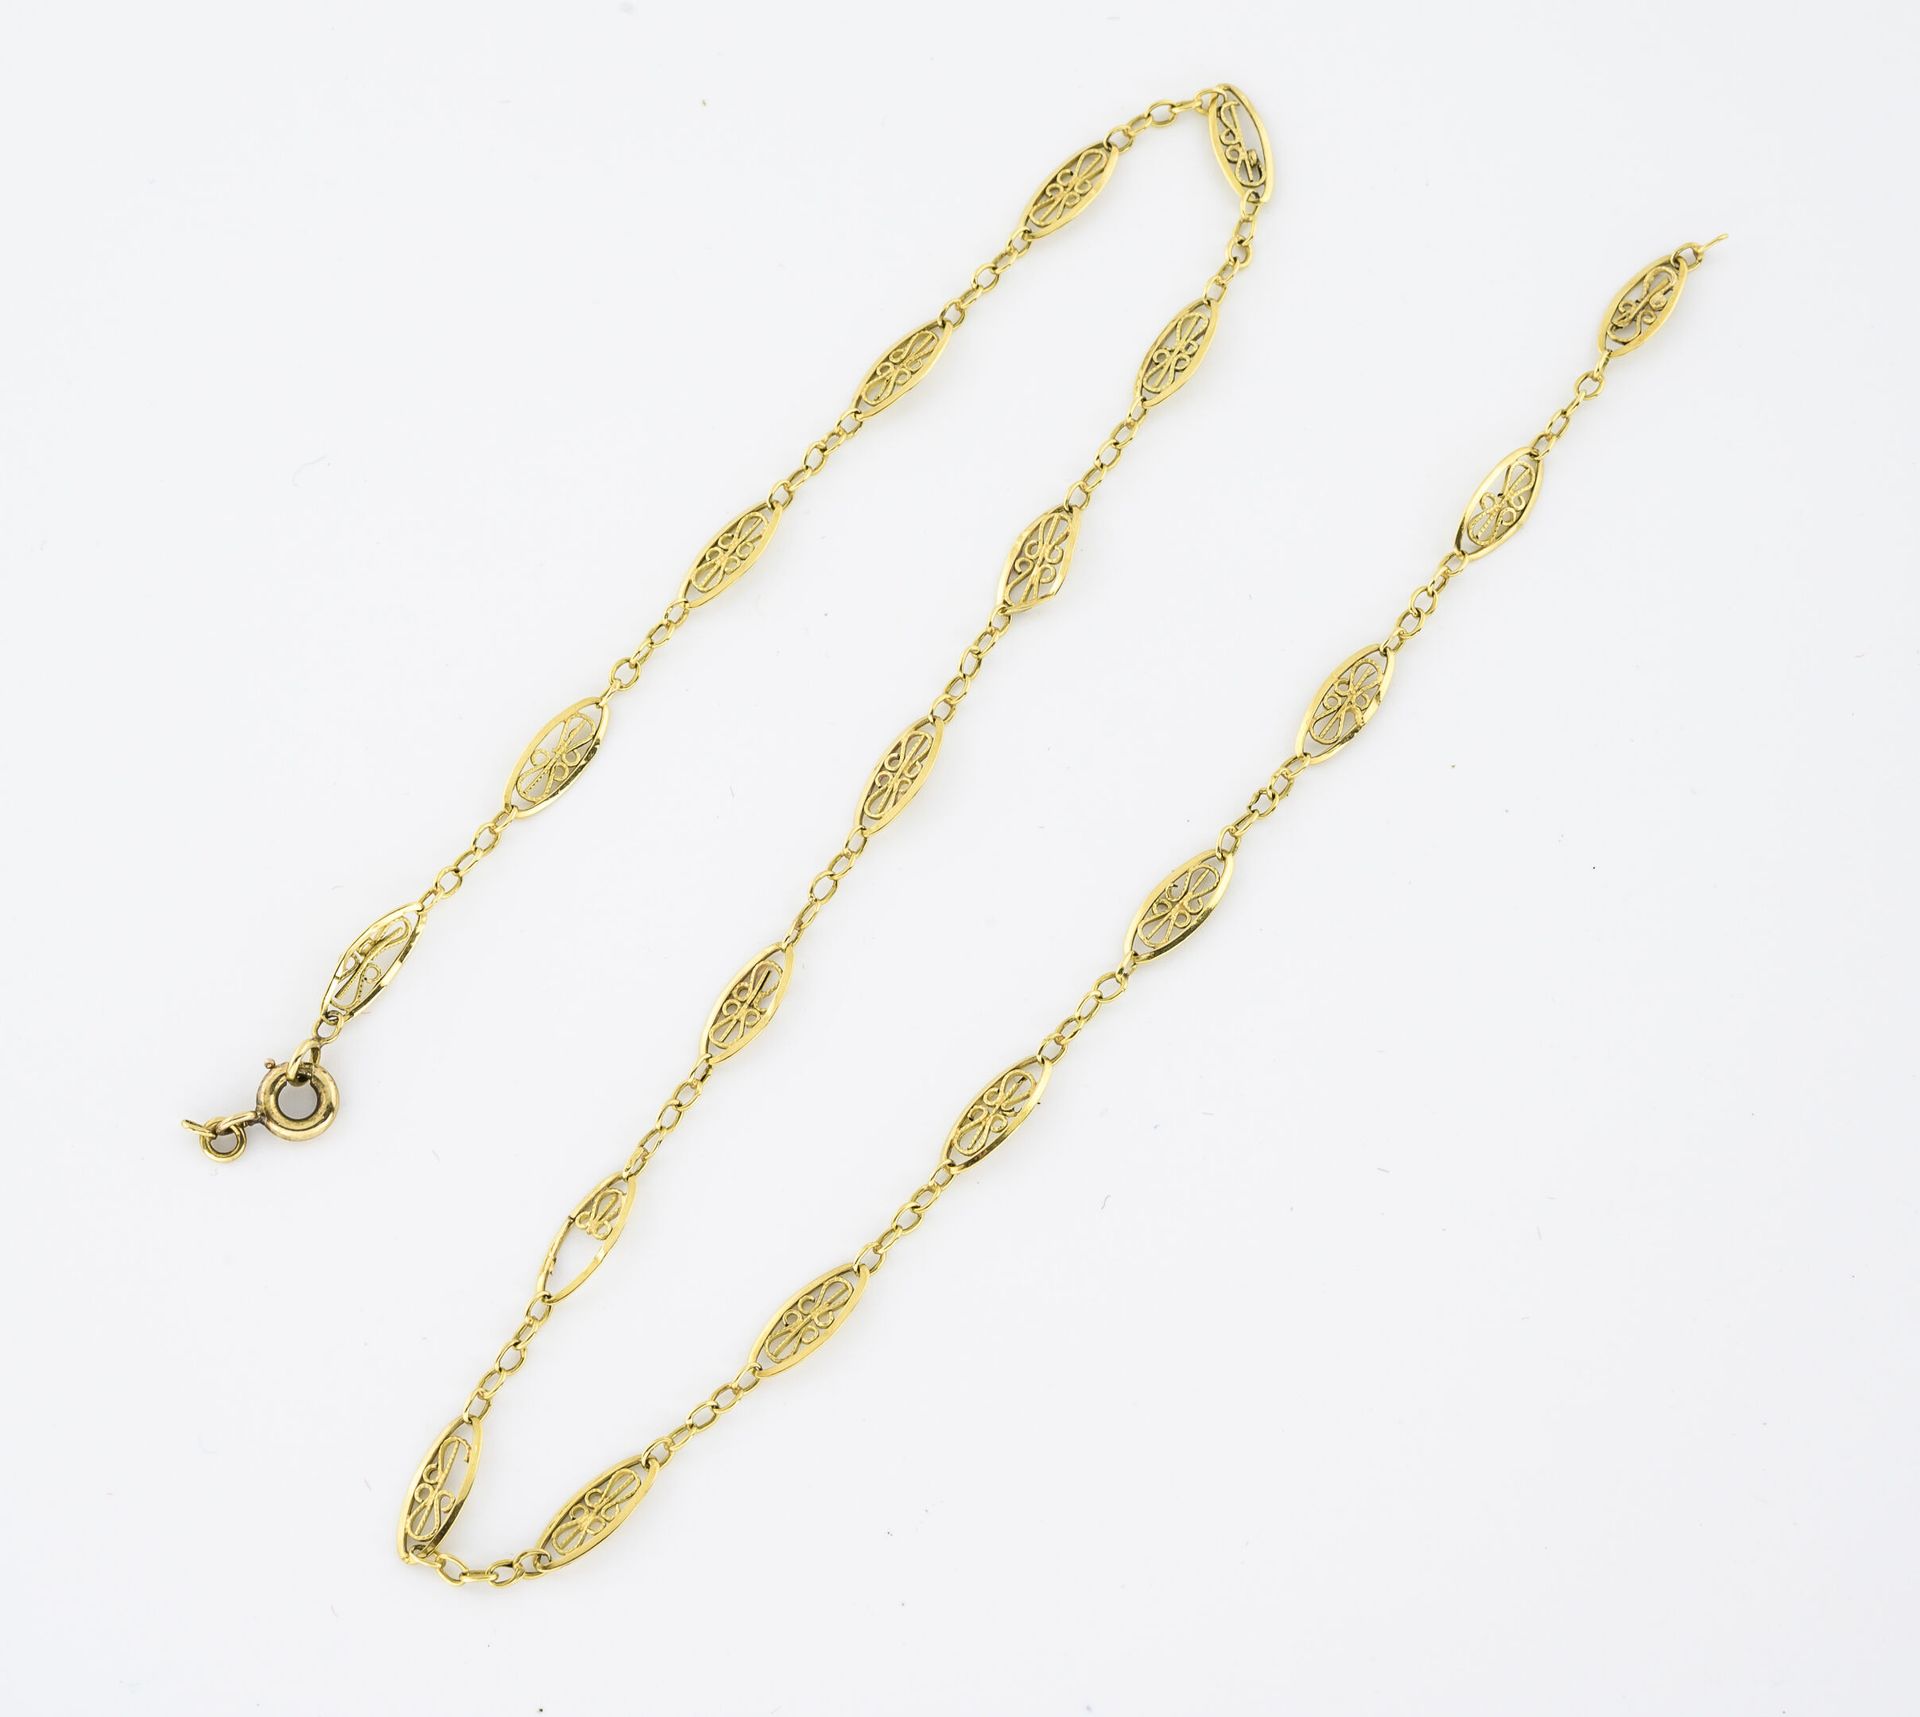 Null Yellow gold (750) necklace with filigree links. 

Spring ring clasp.

Weigh&hellip;